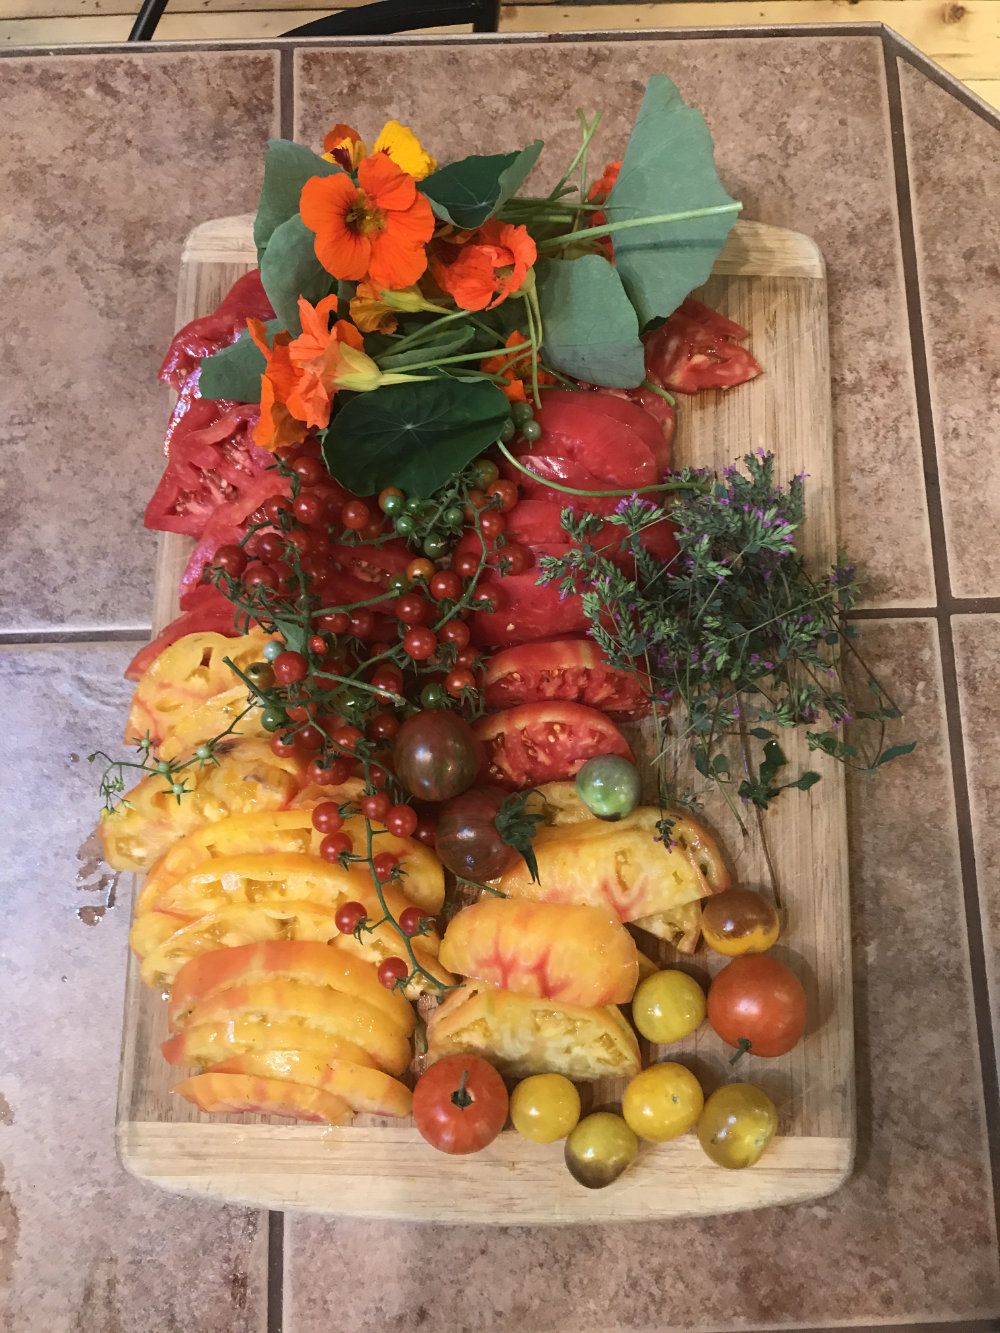 An assortment of heirloom tomatoes sliced on a tray for happy hour.